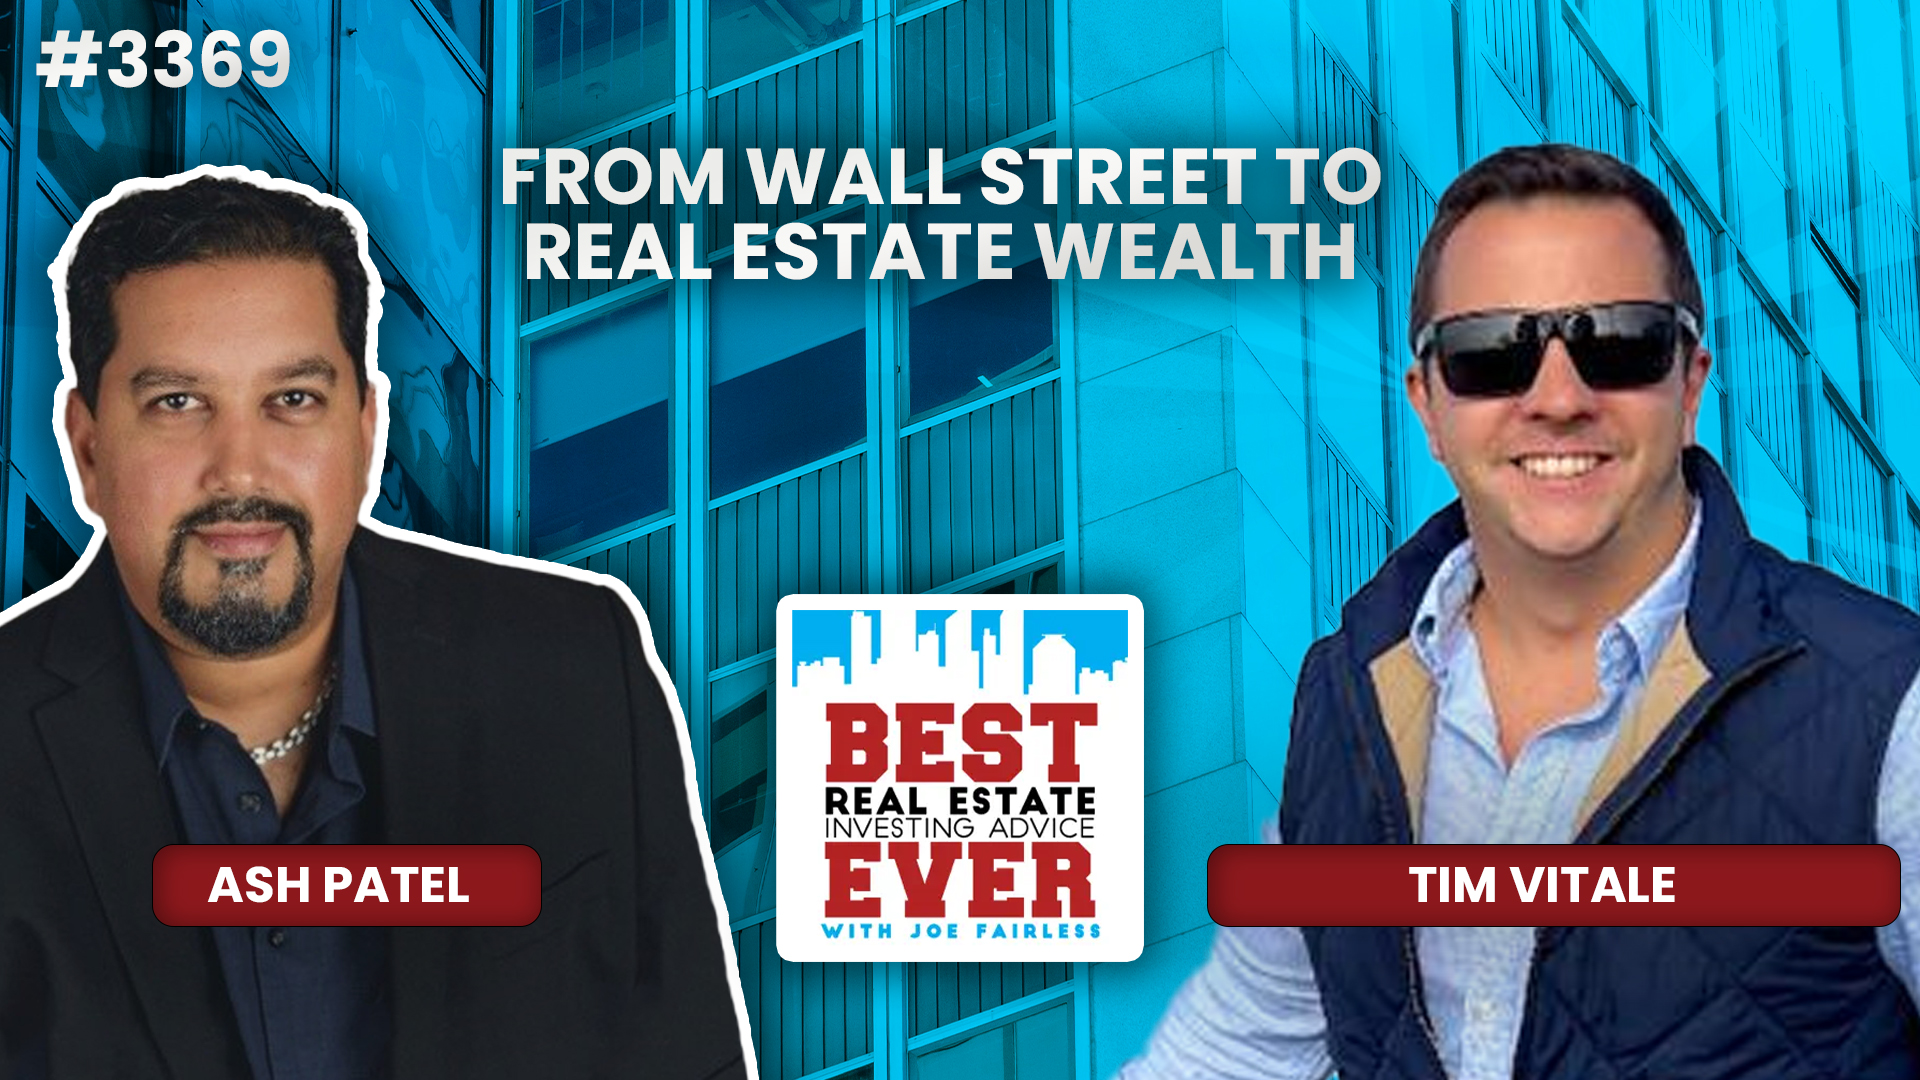 JF3369: Tim Vitale - From Wall Street to Real Estate Wealth